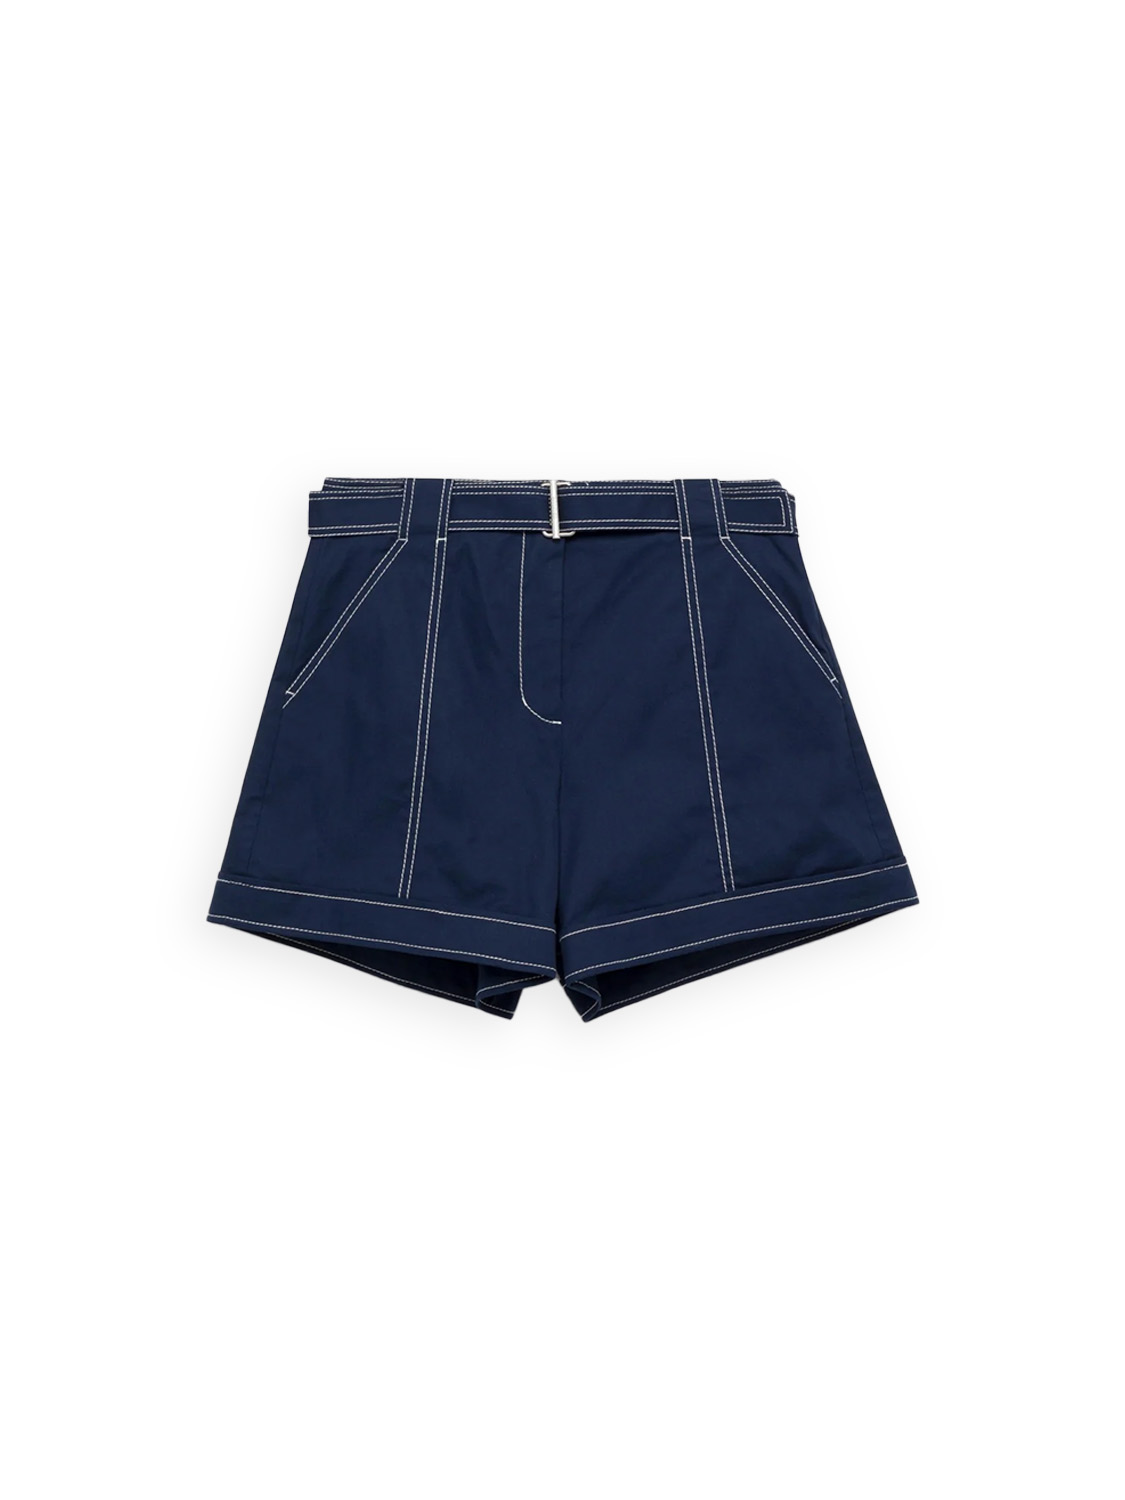 Simkhai Lourie – shorts with white sewing detail  blue 34